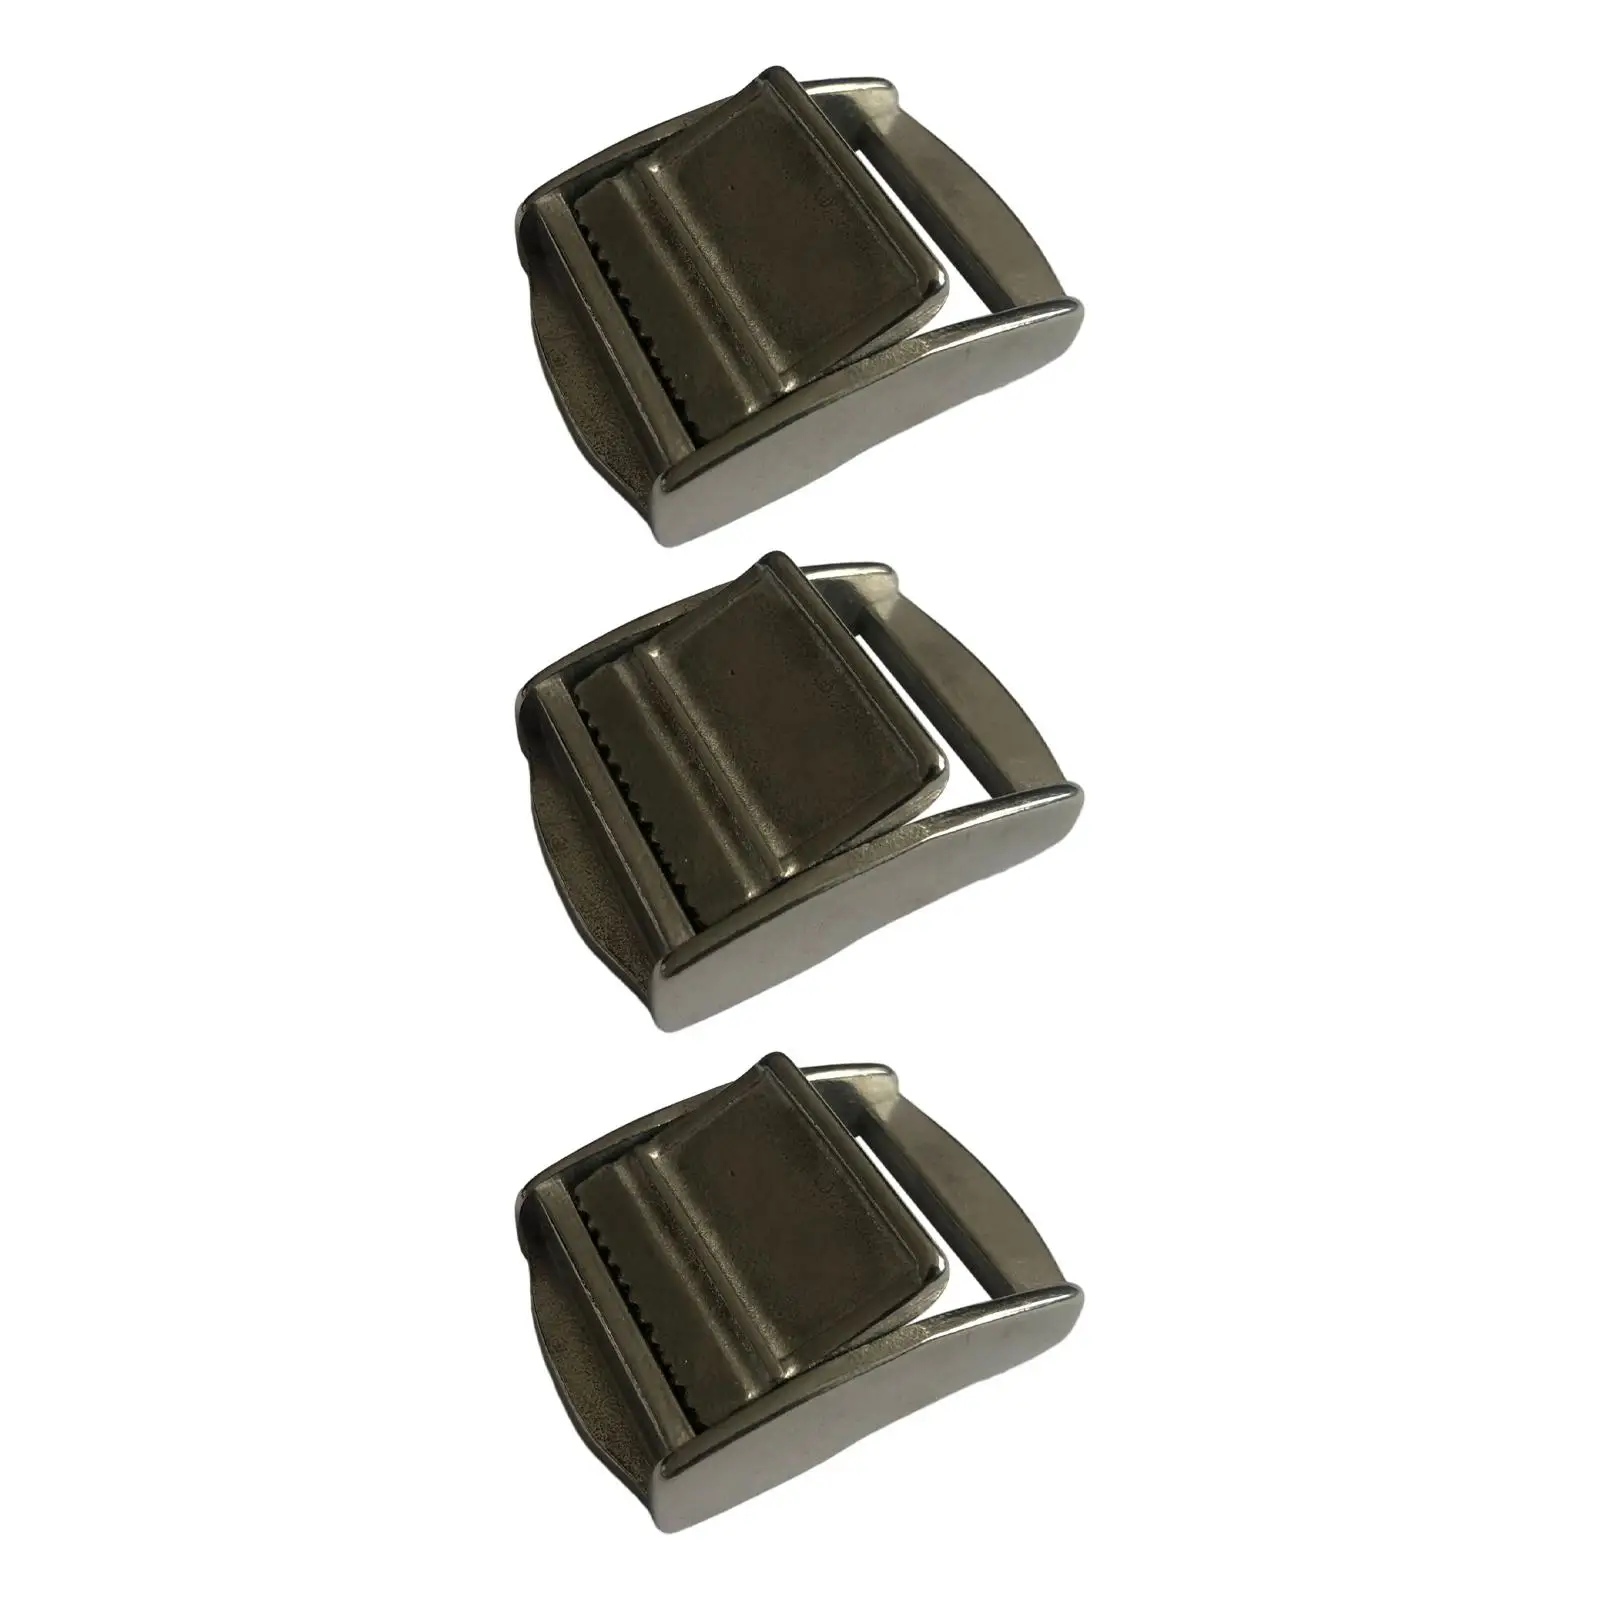 3pcs Stainless Steel Belt Cam Buckles Ending Clips Car Motorcycle Towing